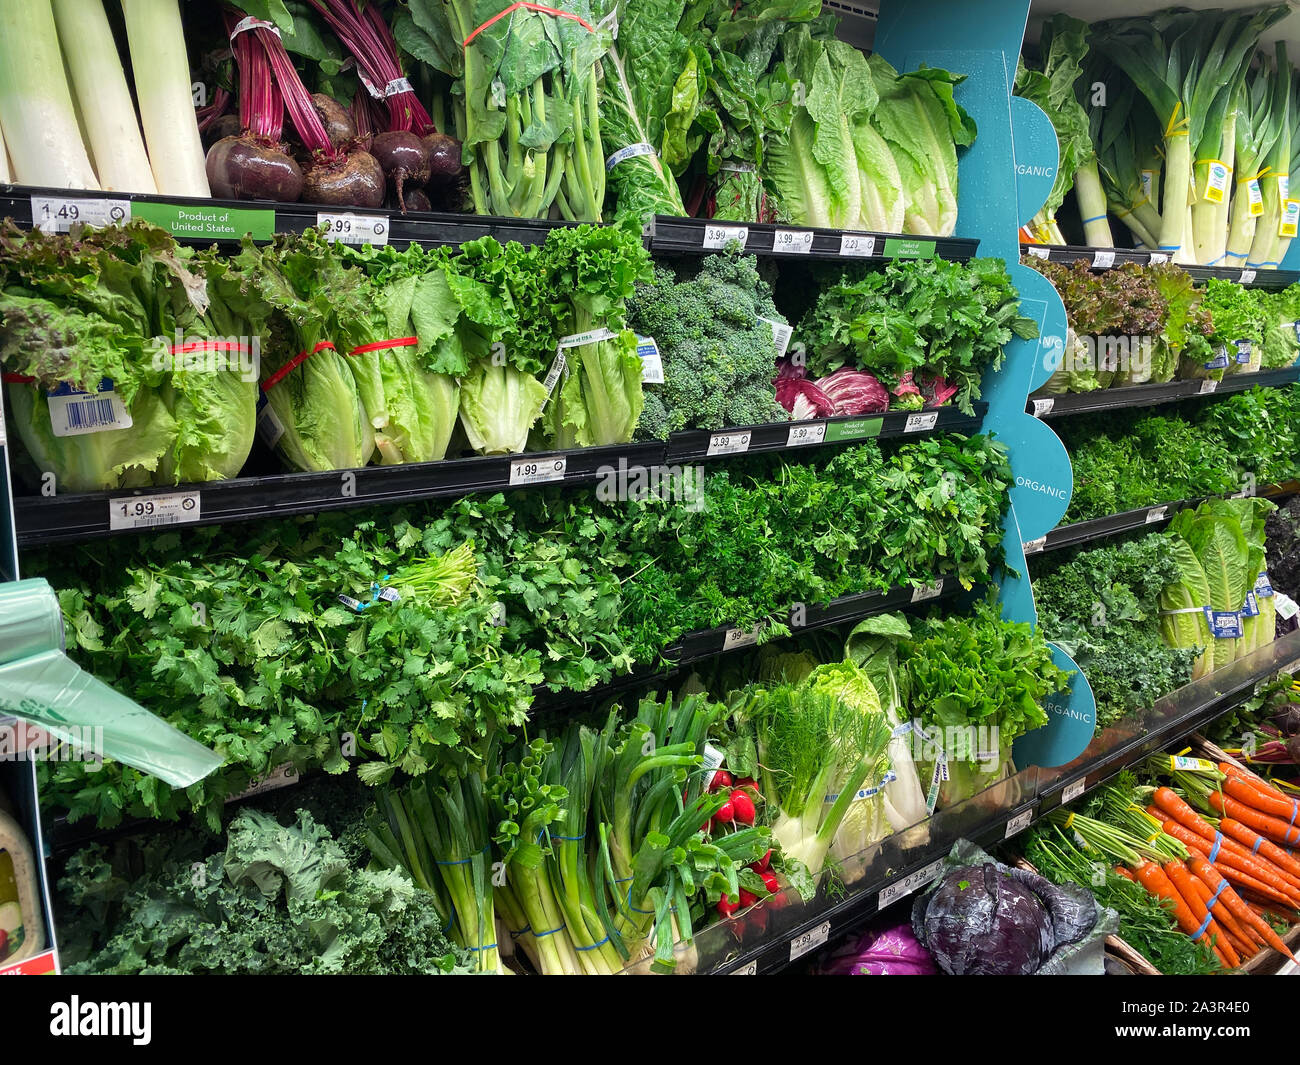 https://c8.alamy.com/comp/2A3R4E0/orlandoflusa-10819-the-fresh-produce-aisle-of-a-grocery-store-with-colorful-fresh-fruits-and-vegetables-ready-to-be-purchased-by-consumers-2A3R4E0.jpg